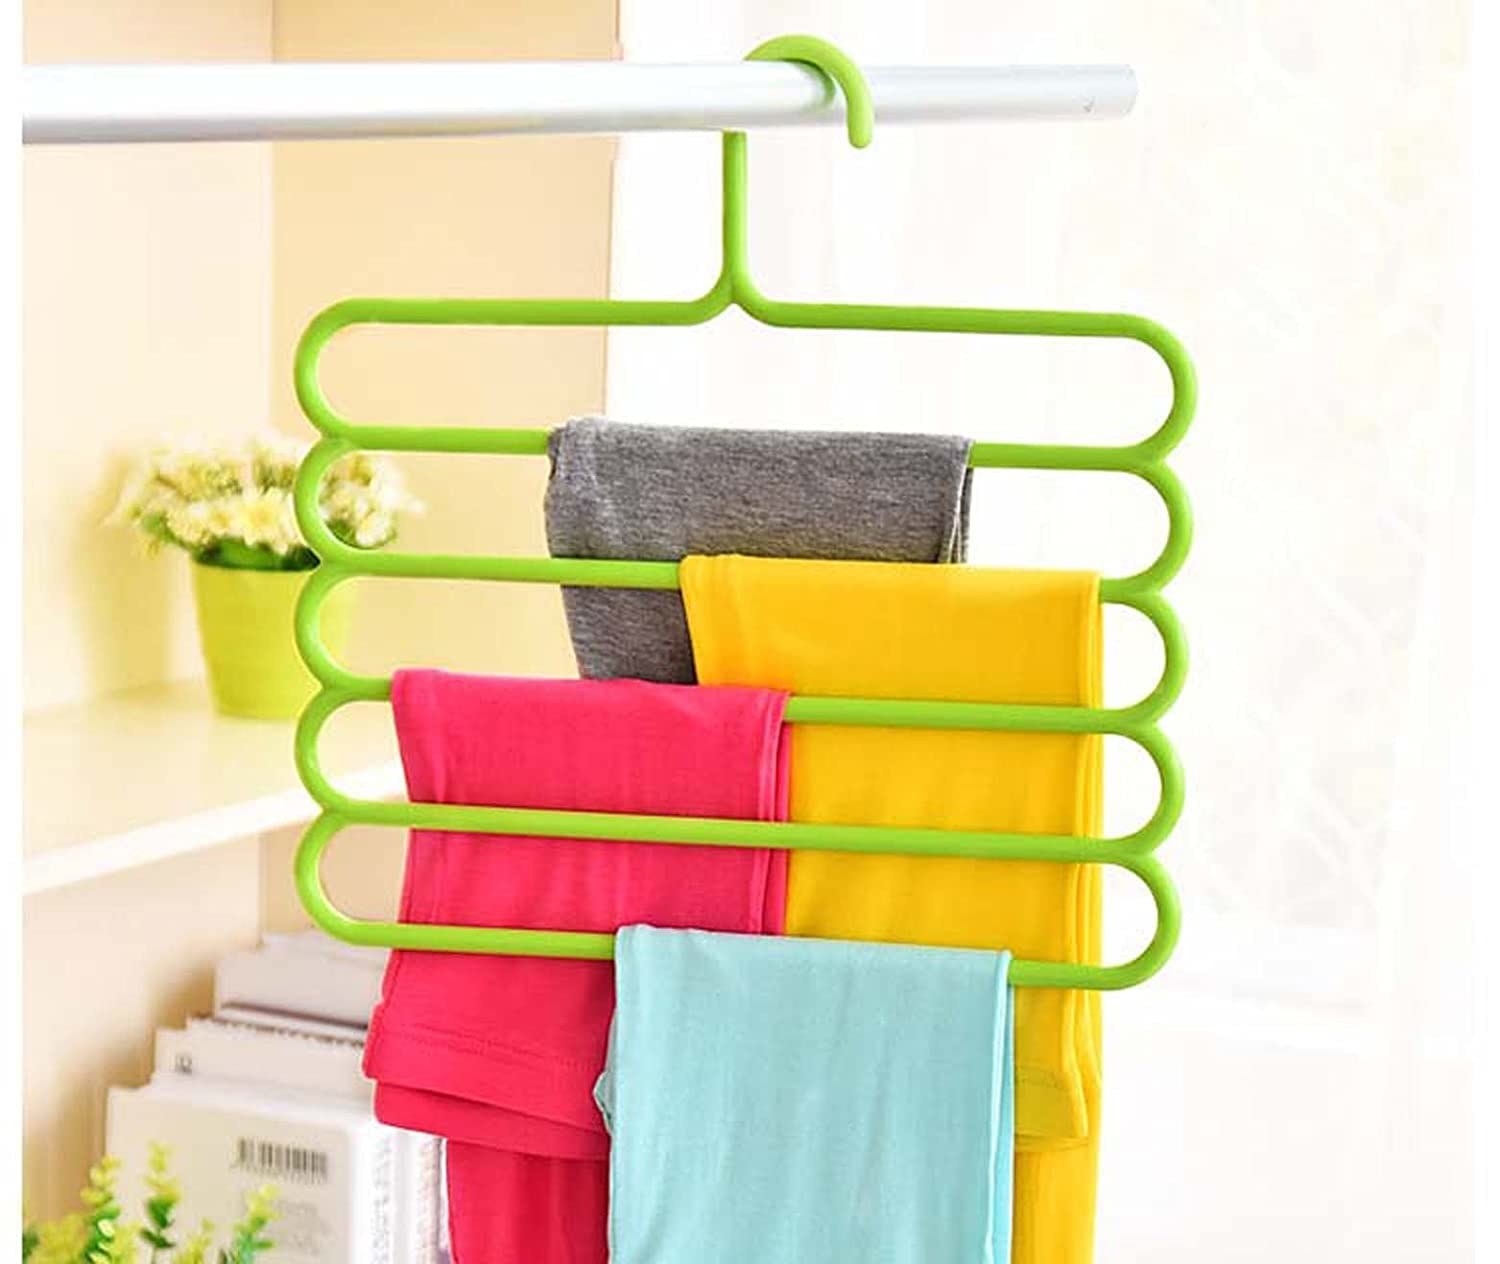 A green multi-tier hanger with clothes on it.